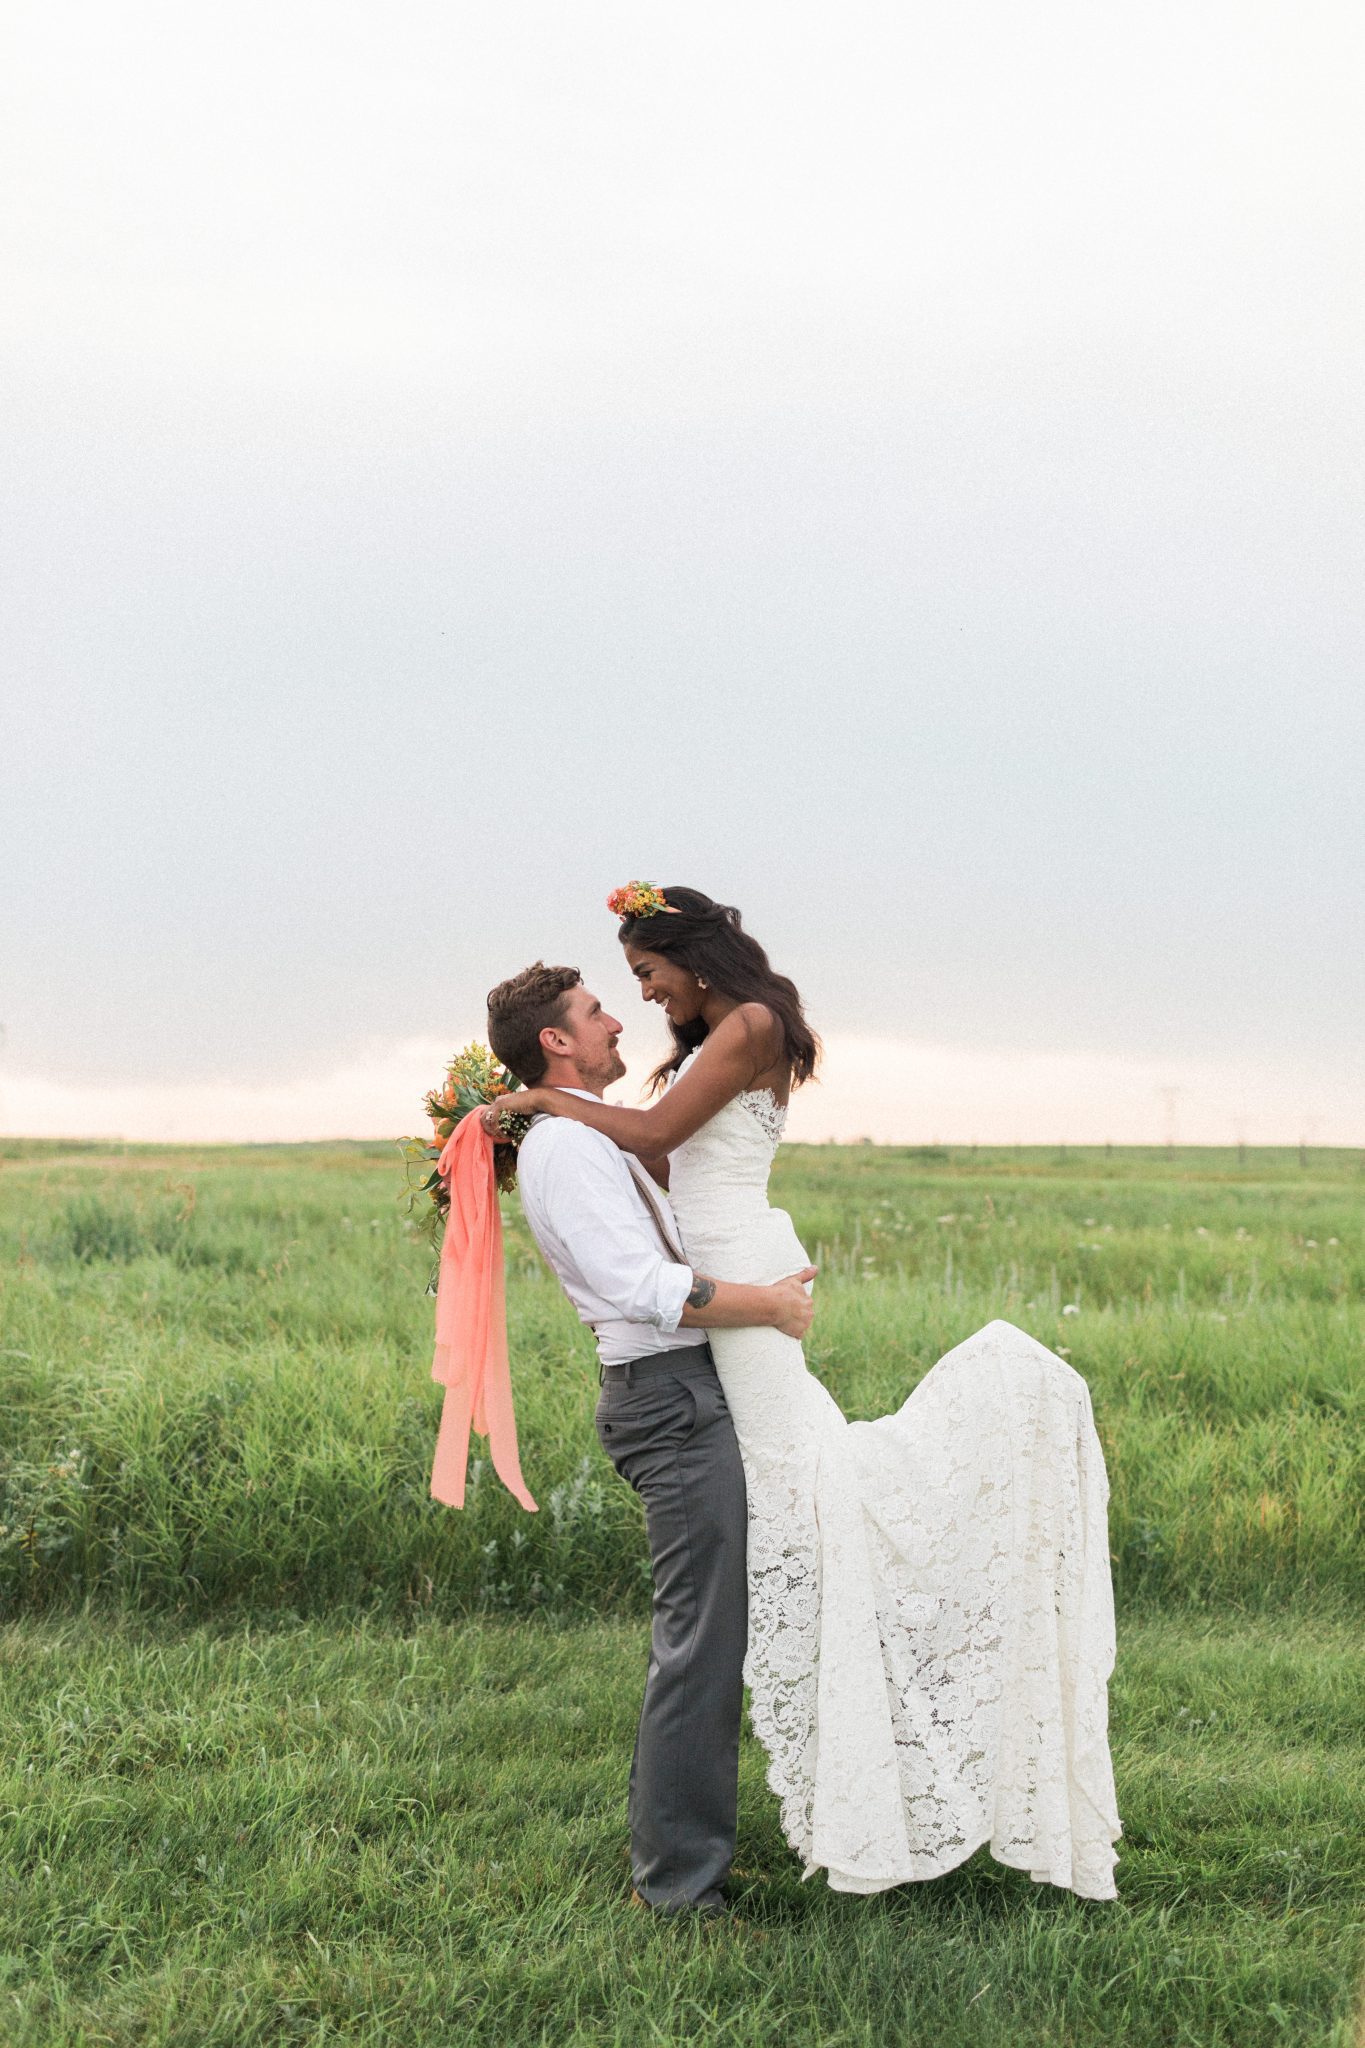 Groom picks up his bride for romantic sunset photos at The Gathered 